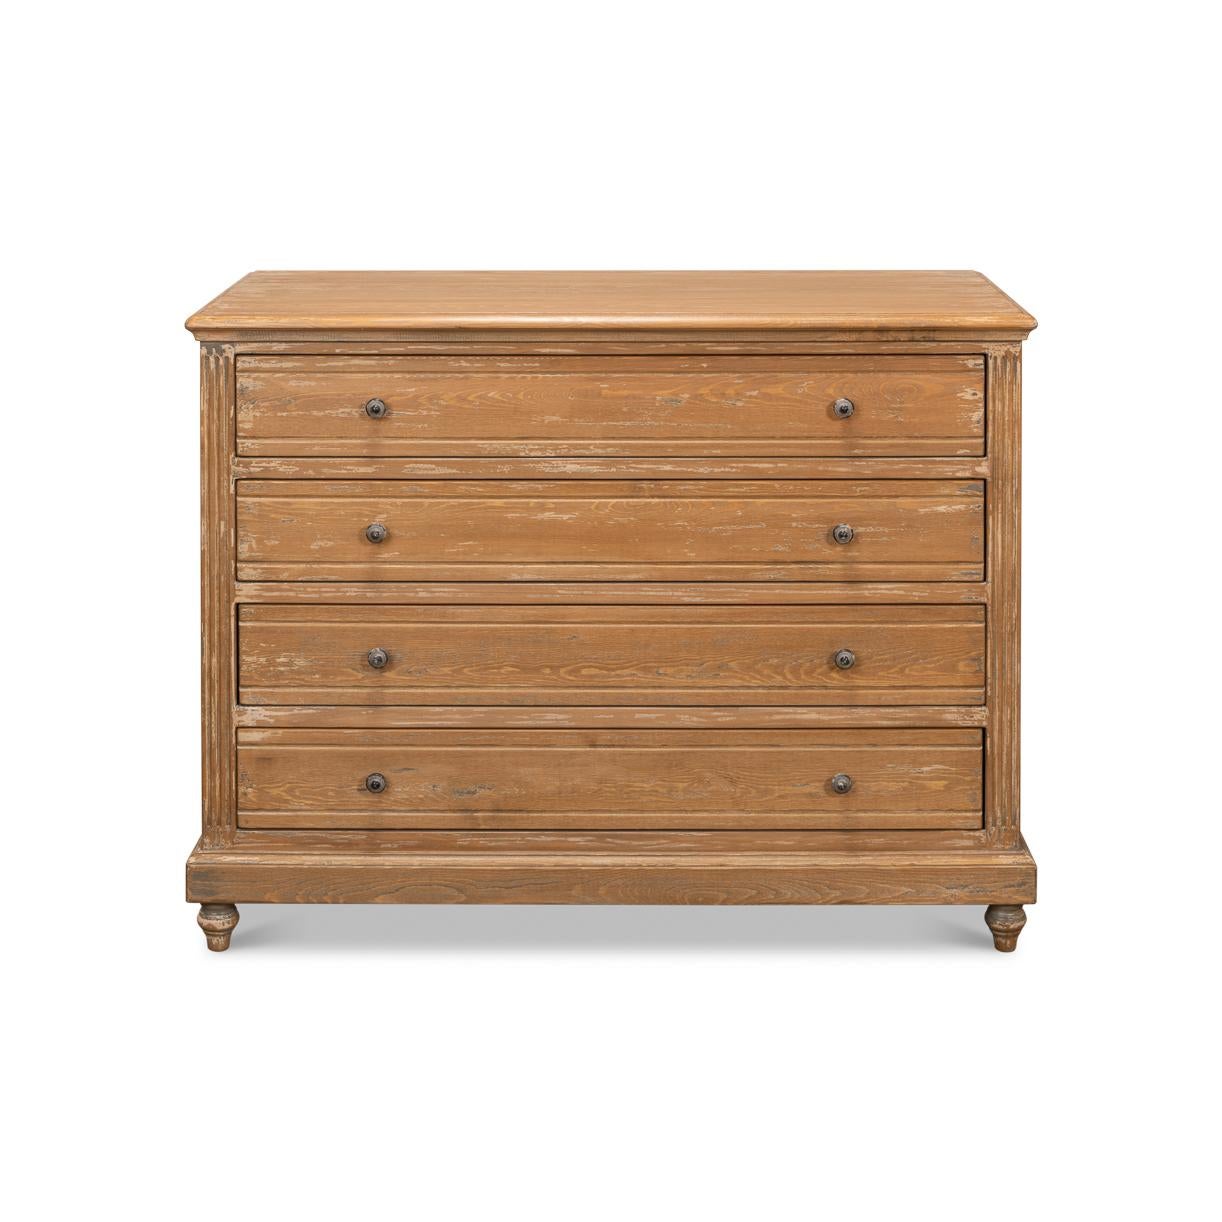 This beautifully crafted piece showcases the warmth of natural wood with a distressed finish, adding an inviting, lived-in feel to your space. The dresser features four spacious drawers, each adorned with classic round knobs, offering ample storage